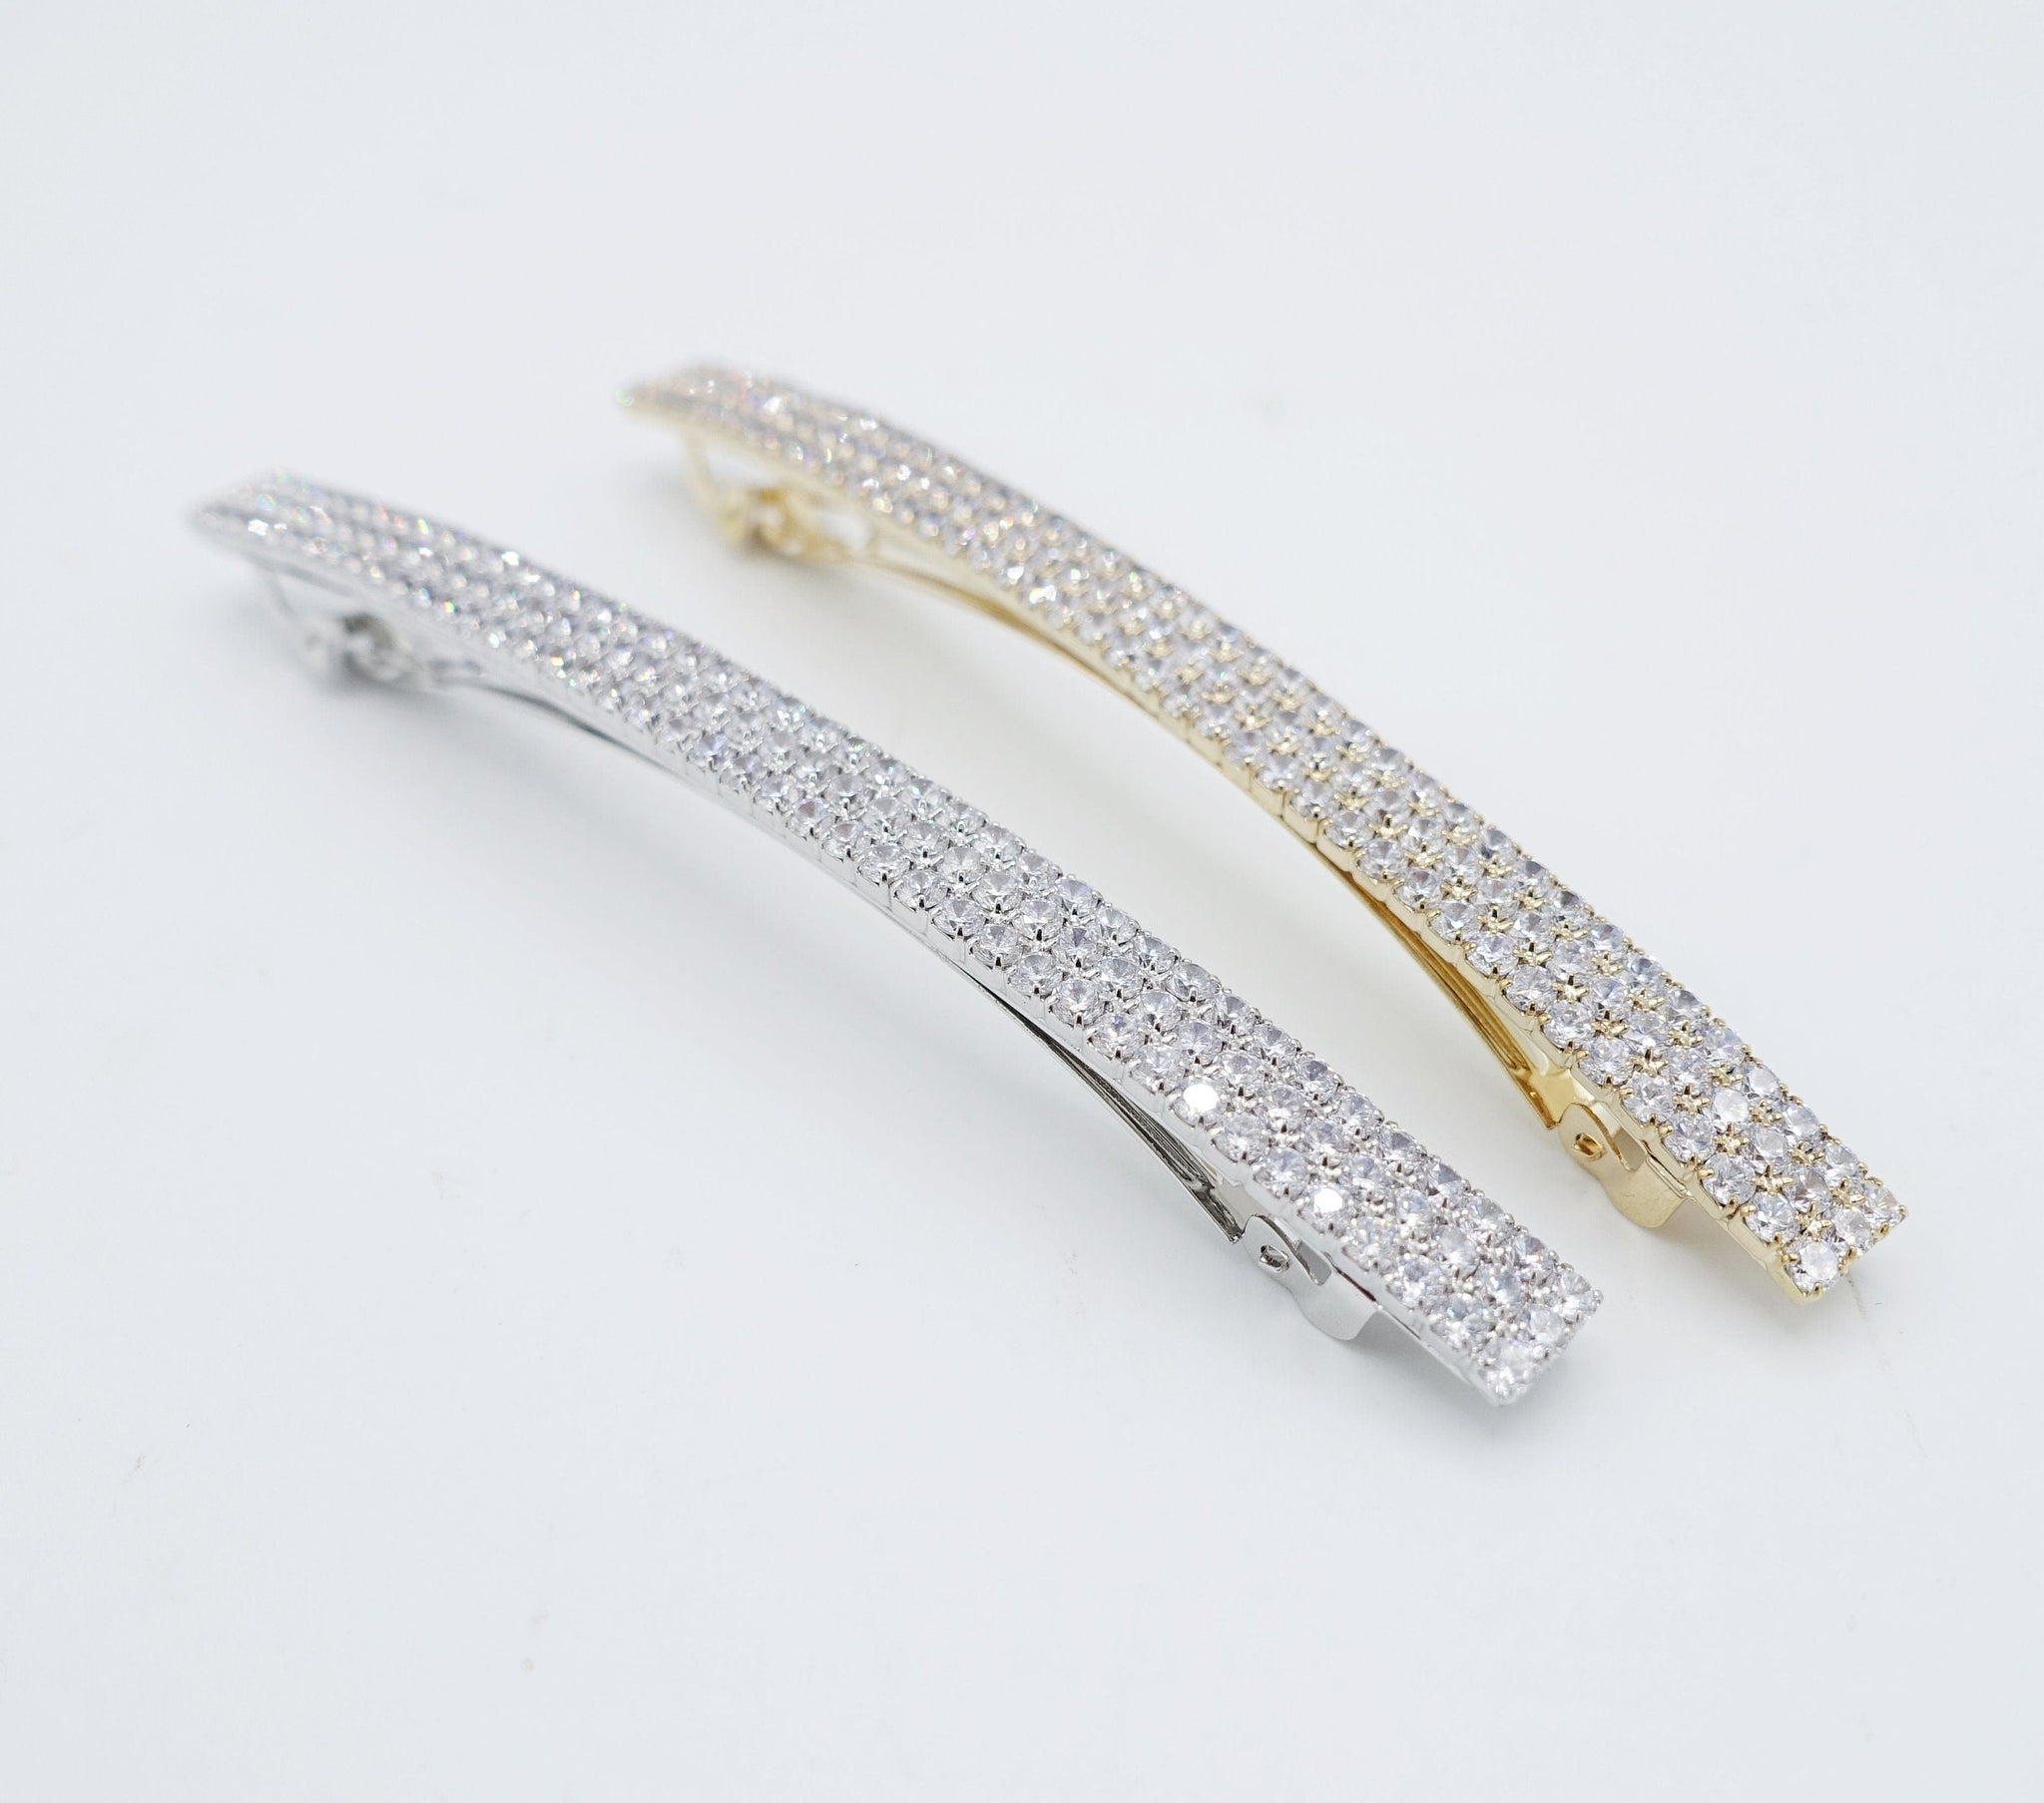 veryshine.com Barrette (Bow) sparkly hair barrette cubic zirconia embellished french barrette women hair clip